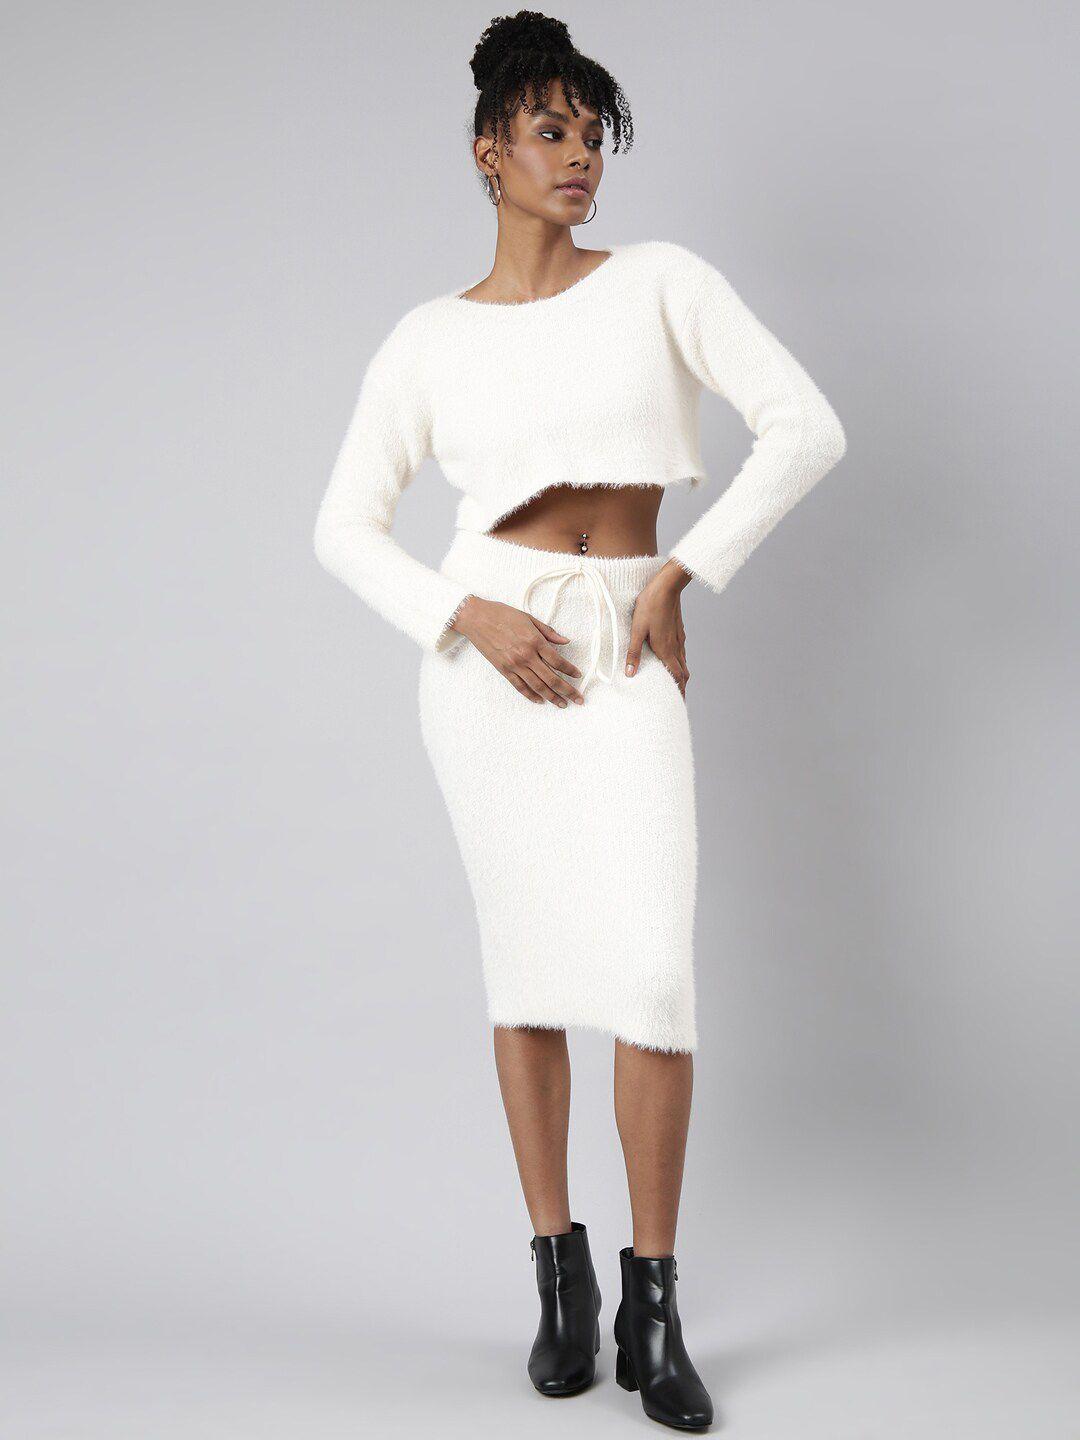 showoff acrylic crop top with skirt co-ords